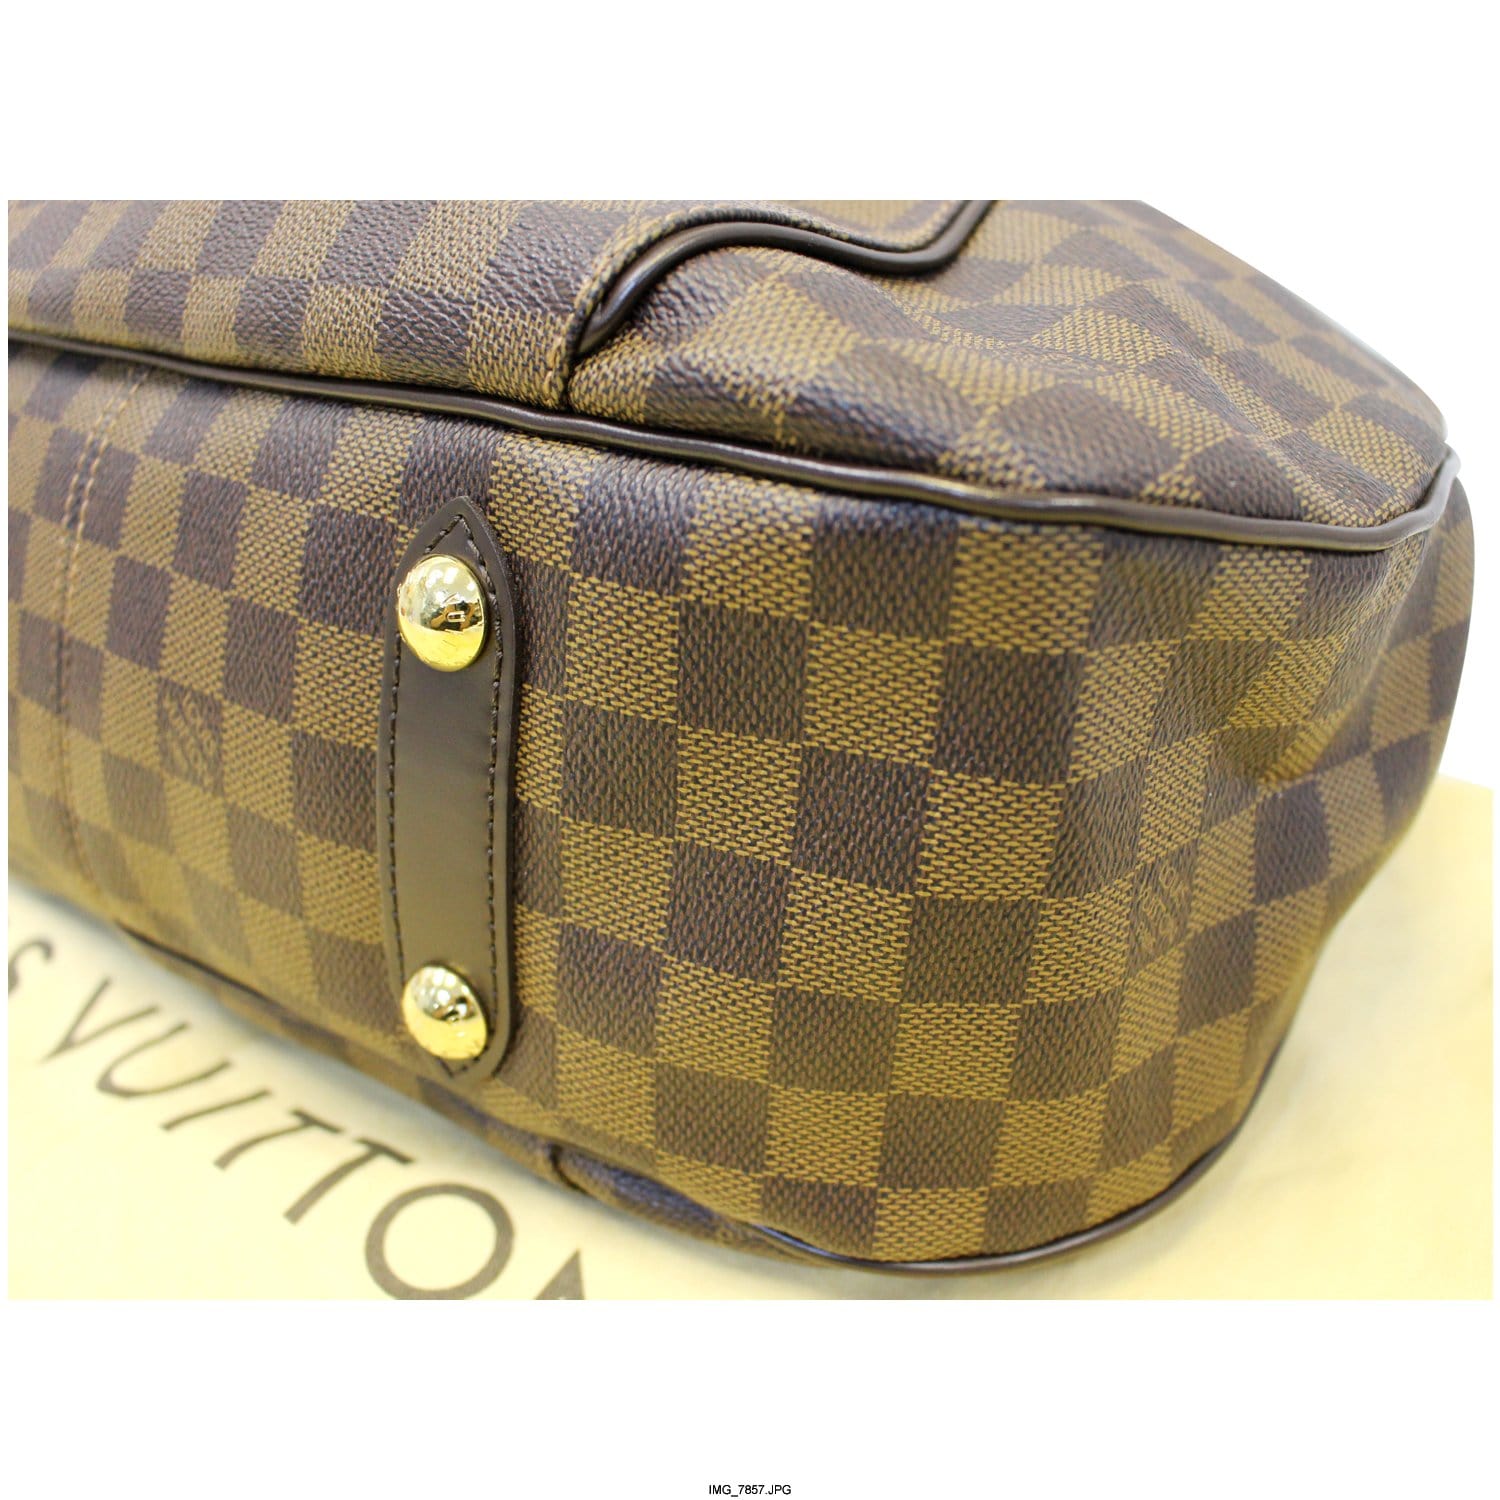 😍😍😍😍 Gently used Louis Vuitton Galliera PM $975 excellent